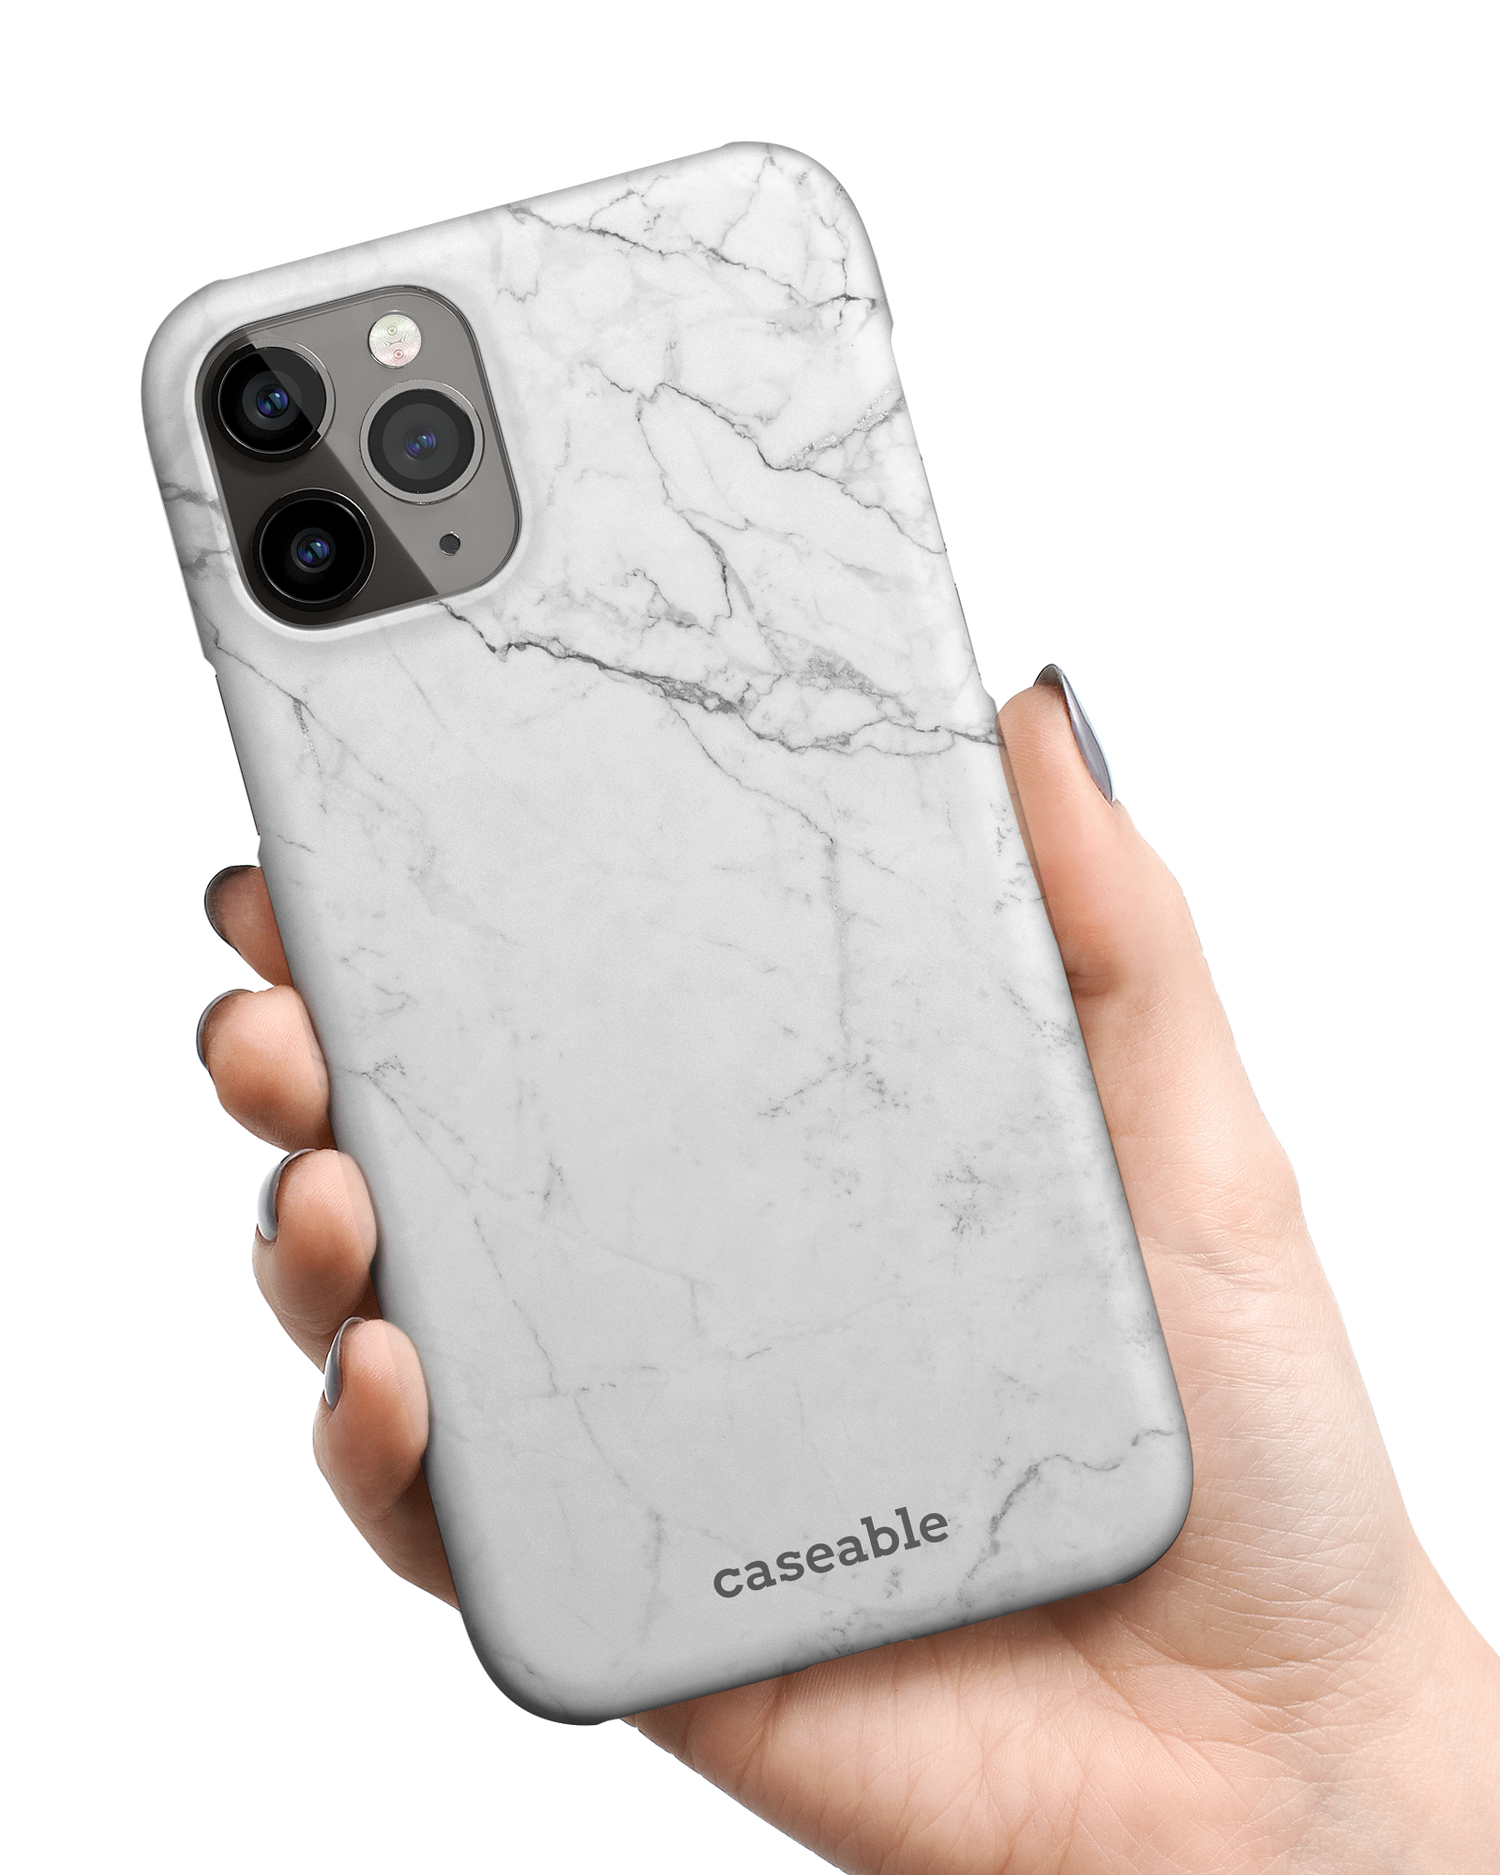 White Marble Hard Shell Phone Case Apple iPhone 11 Pro Max held in hand